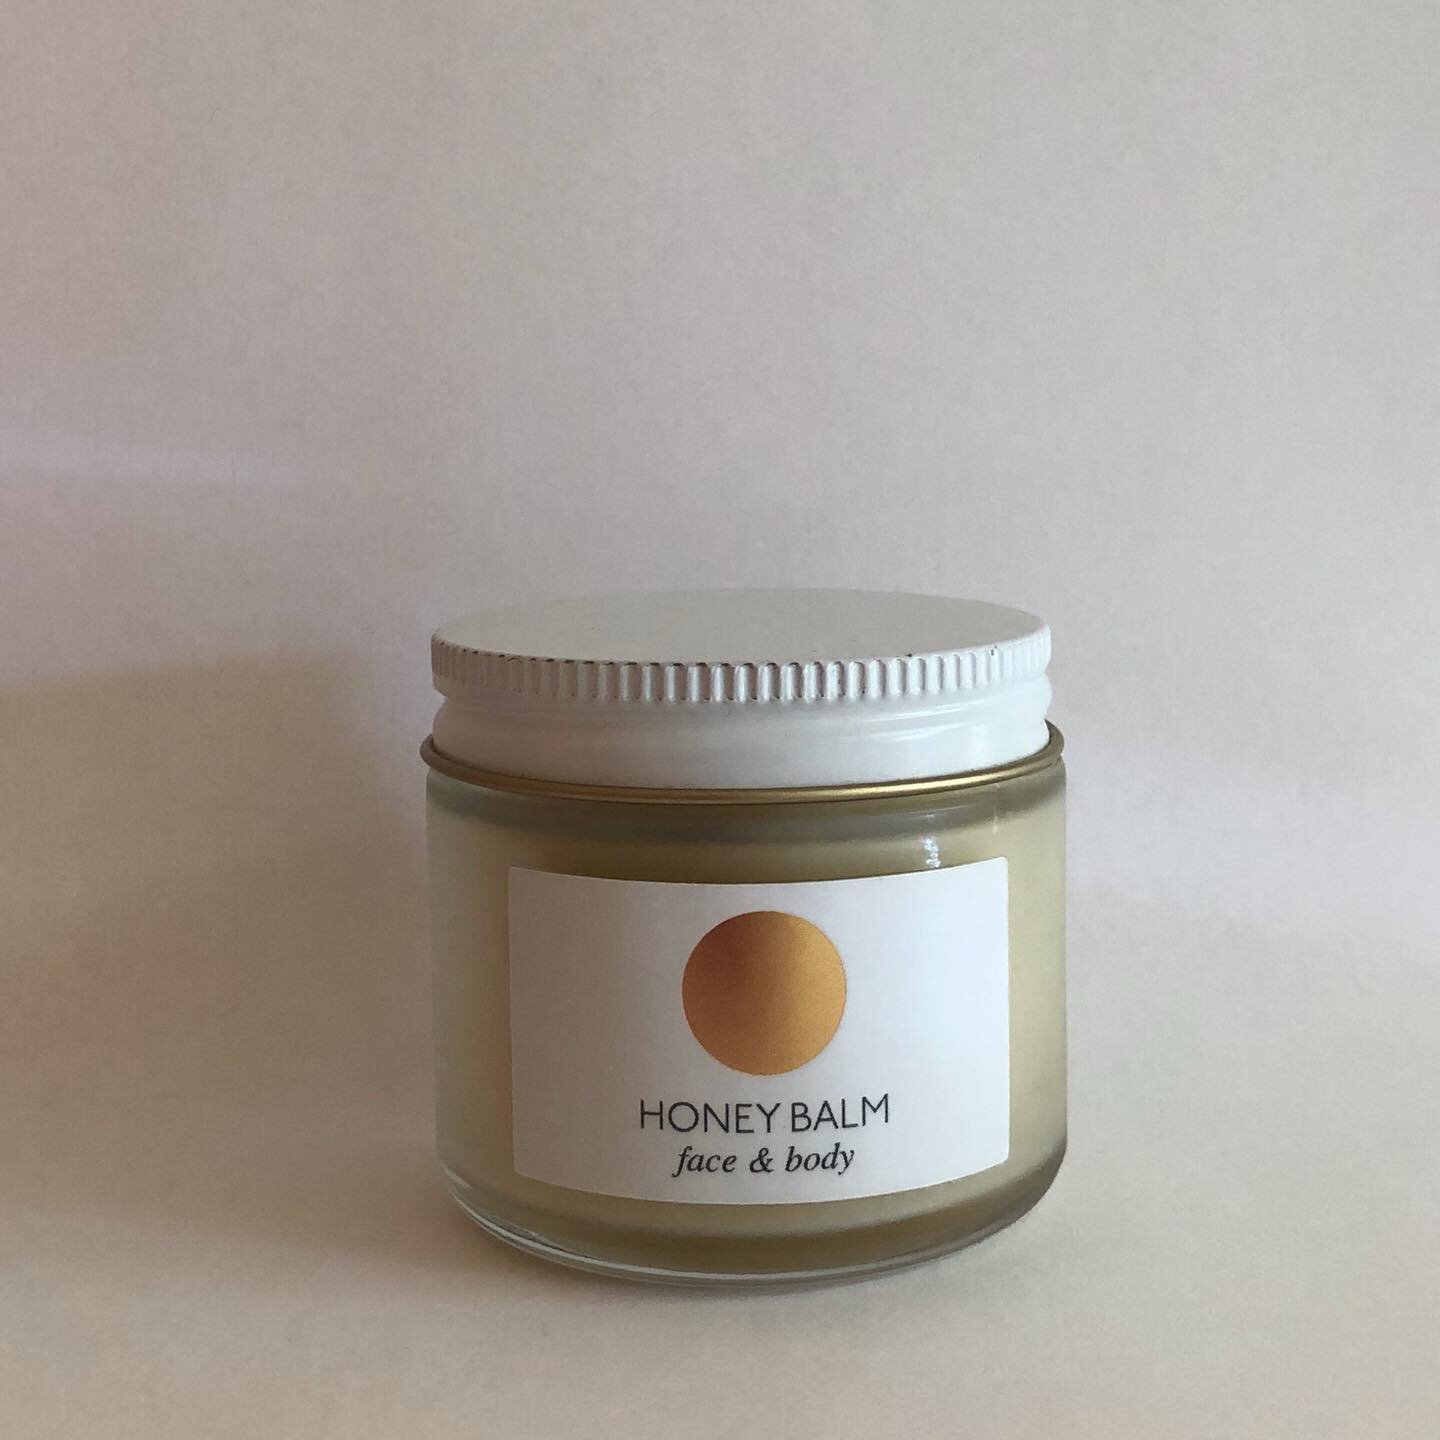 RIAH was founded by sisters Mariah (@raarariah) and Lydia Kegler (@lydia.kegler). Every jar of Honey Balm is handmade in small batches by us. Ours is a tribute to the all-healing balm our mother made when we were growing up. A little glass jar was in